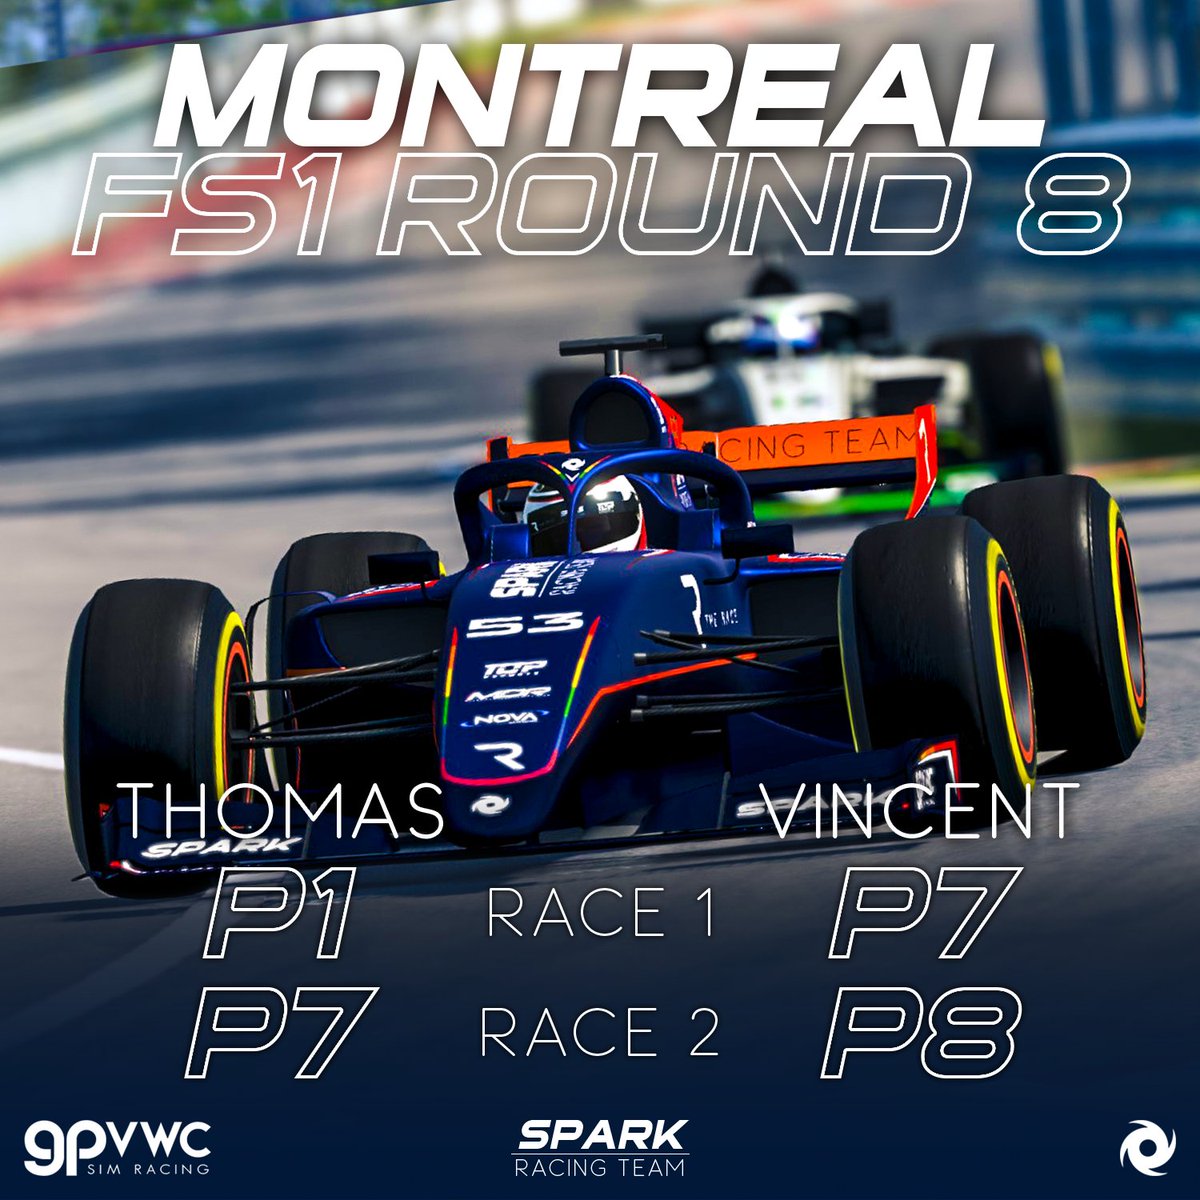 This is our first race 1 win this season. Tom stayed out of chaos, was able to close the gap to Jack and take the lead. #gpvwc #FS1 #simracing #esports #Canadian #PrideMonth